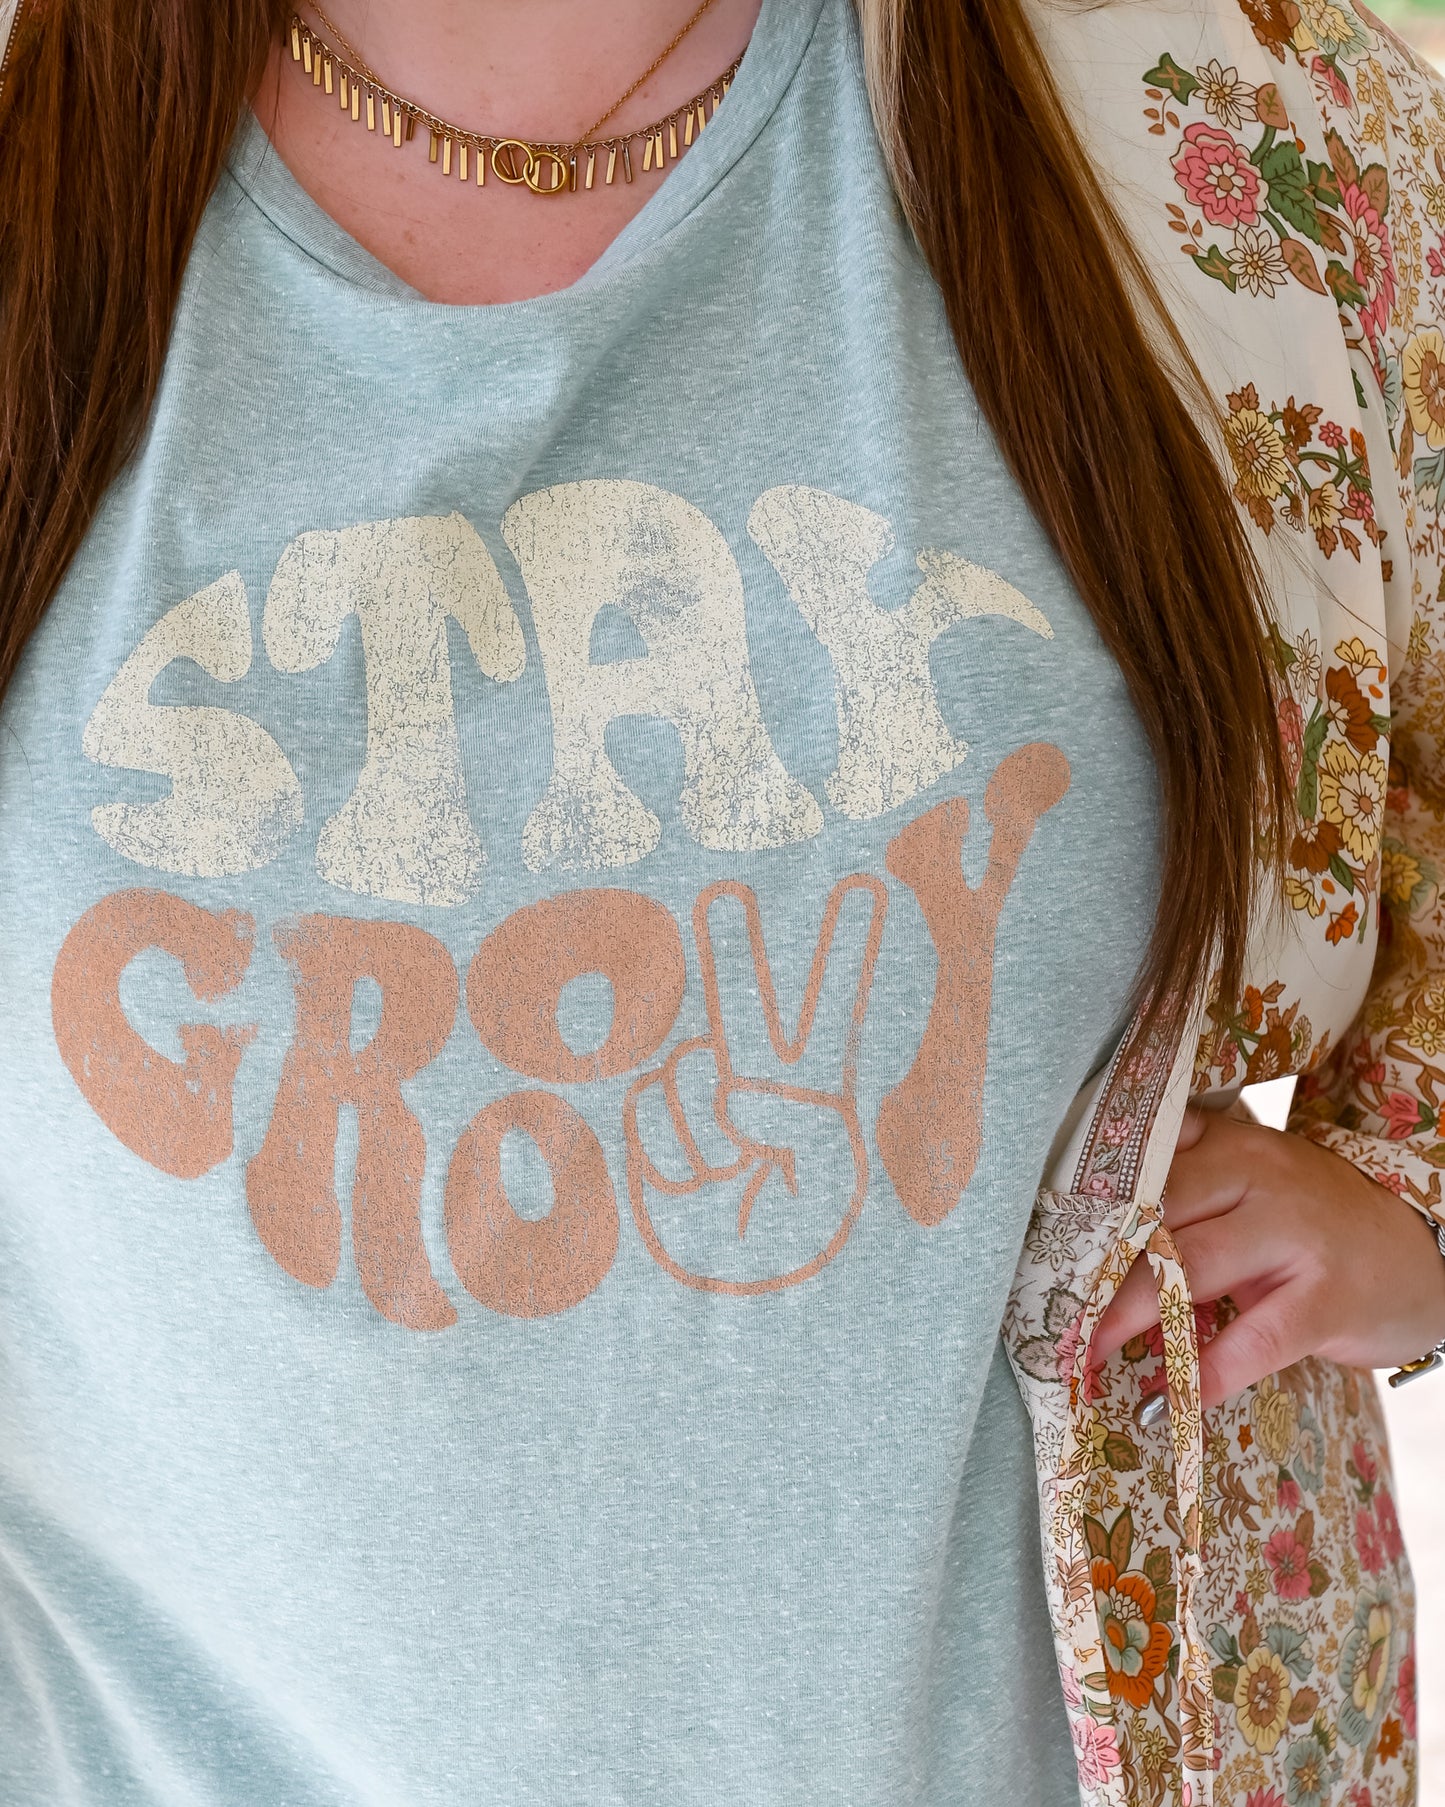 "Stay Groovy" Graphic Tee PLUS